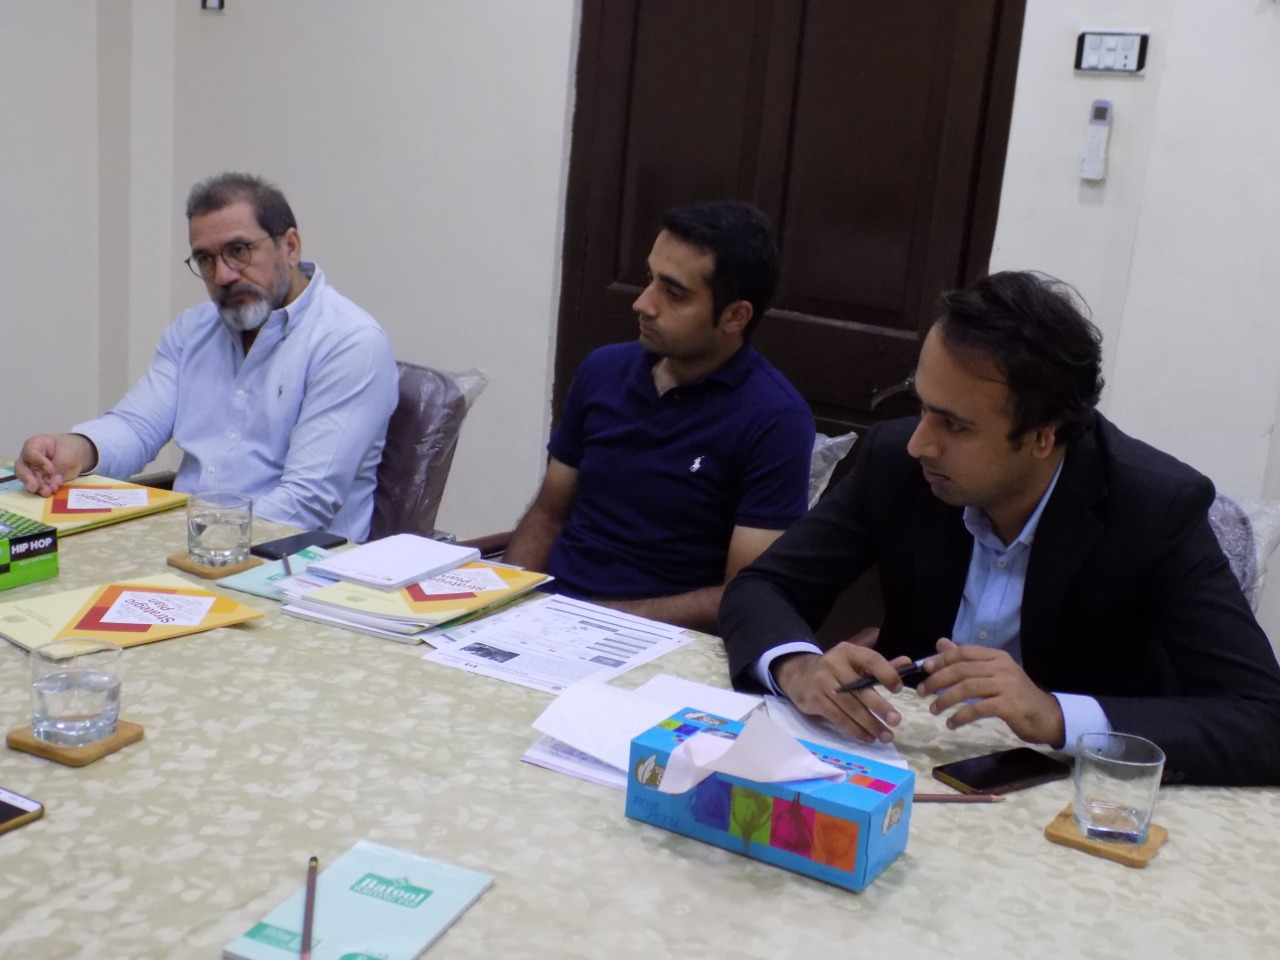 The Commission held a meeting with CEO TDEA-FAFEN